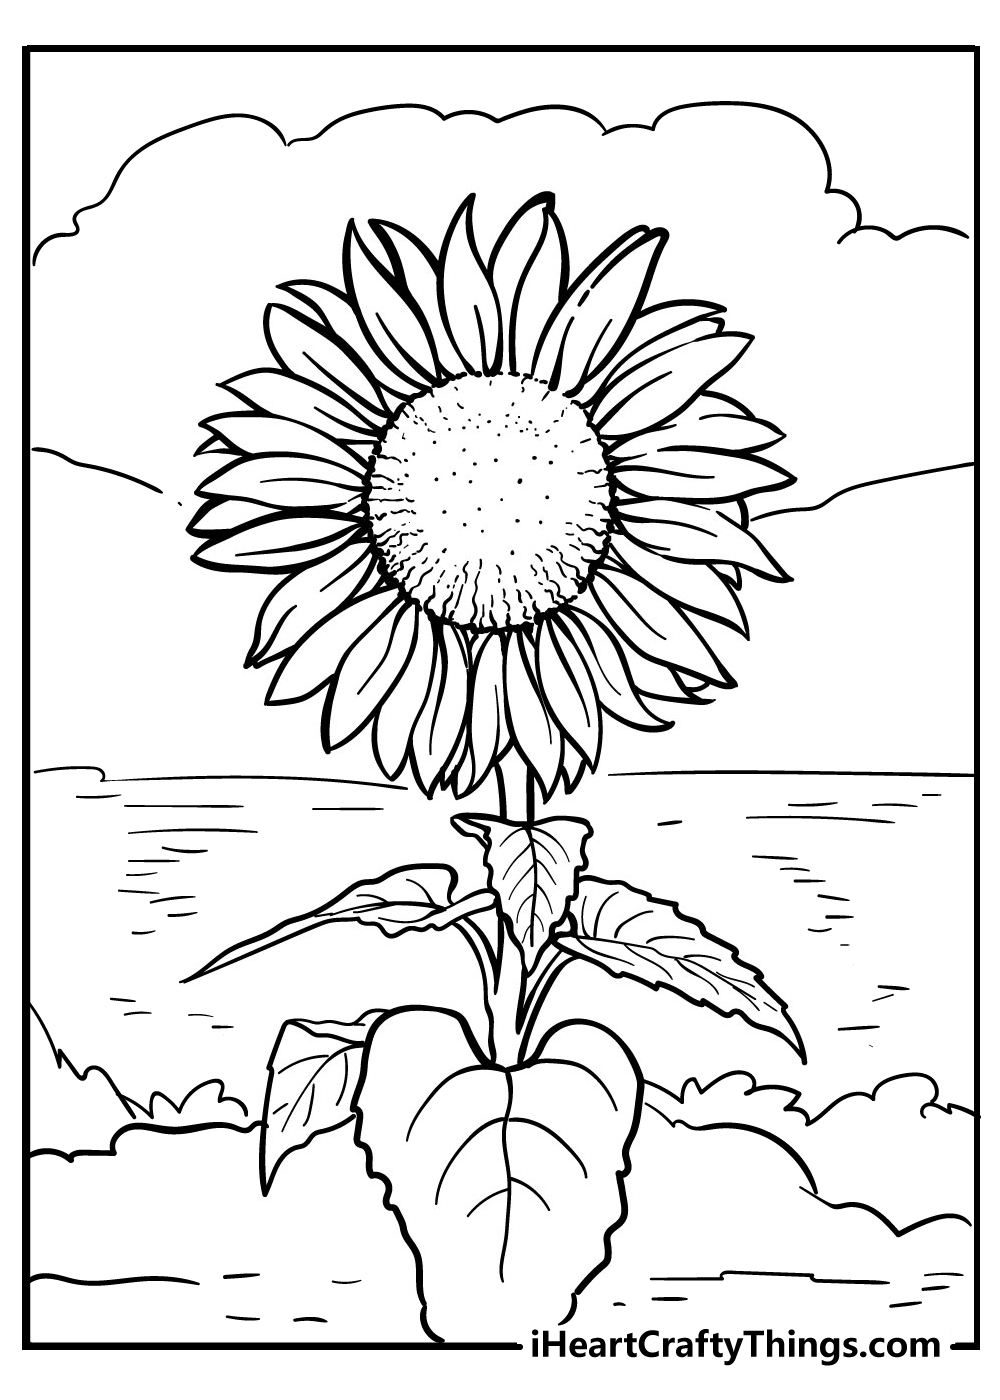 Printables sunflower coloring pages flower coloring pages coloring pages